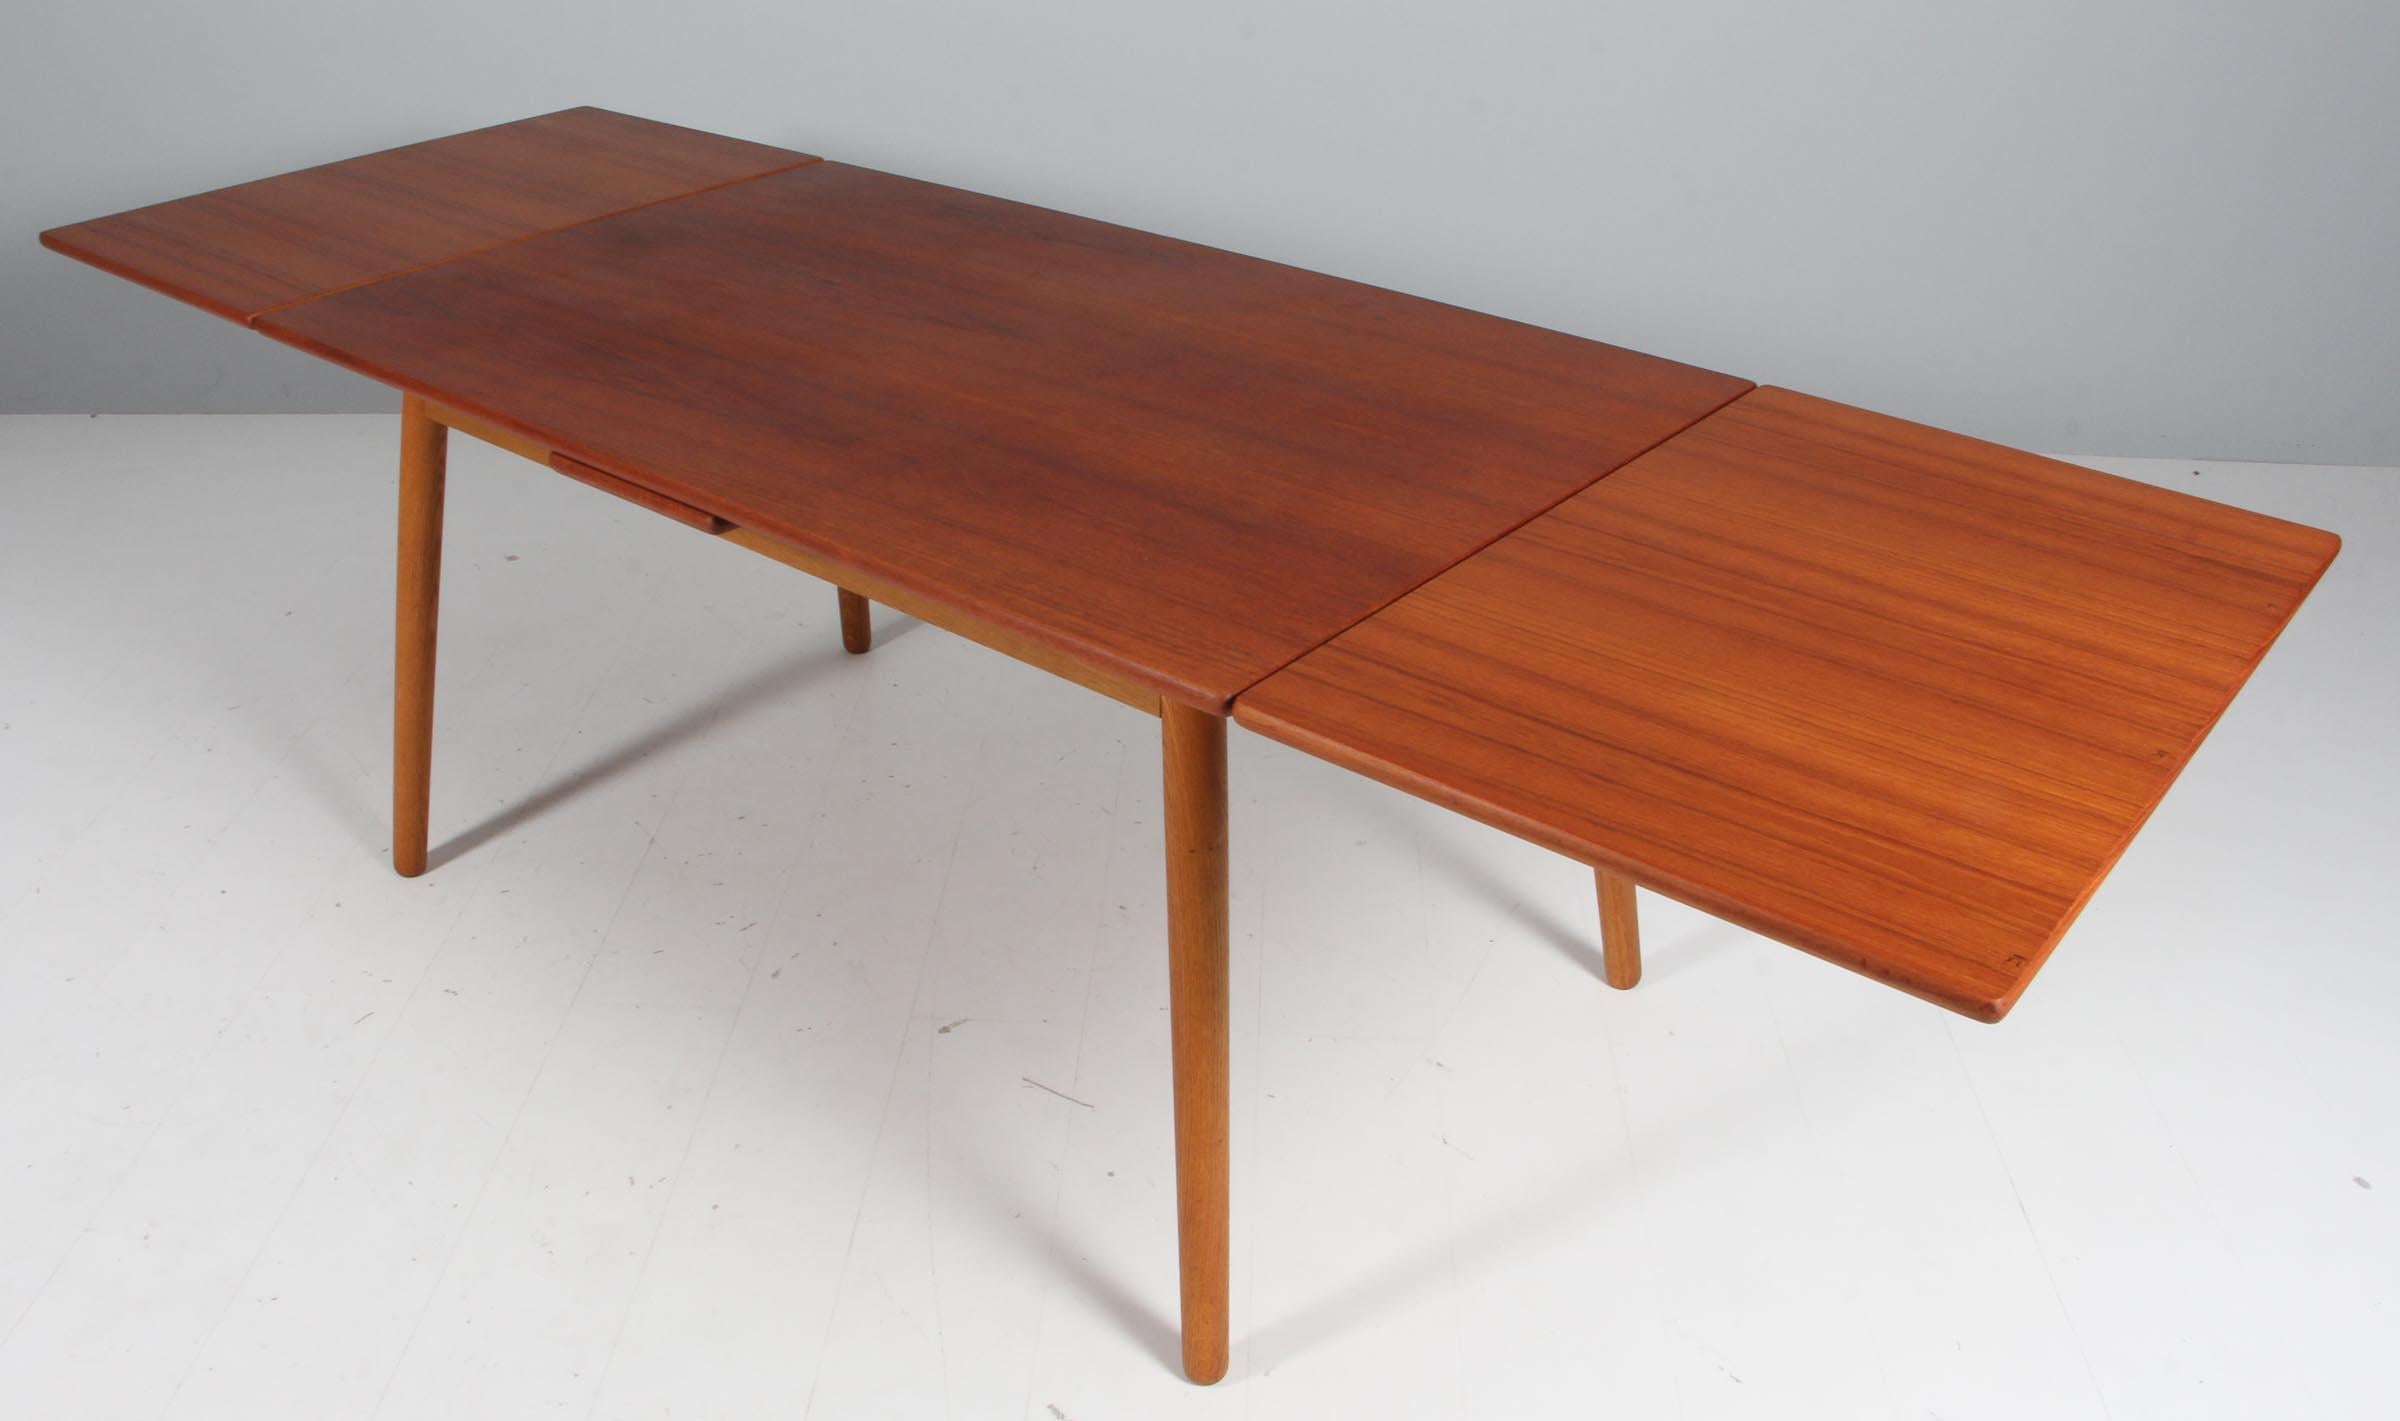 Late 20th Century Poul Volther for FDB dining table in teak and oak, extension leafes.